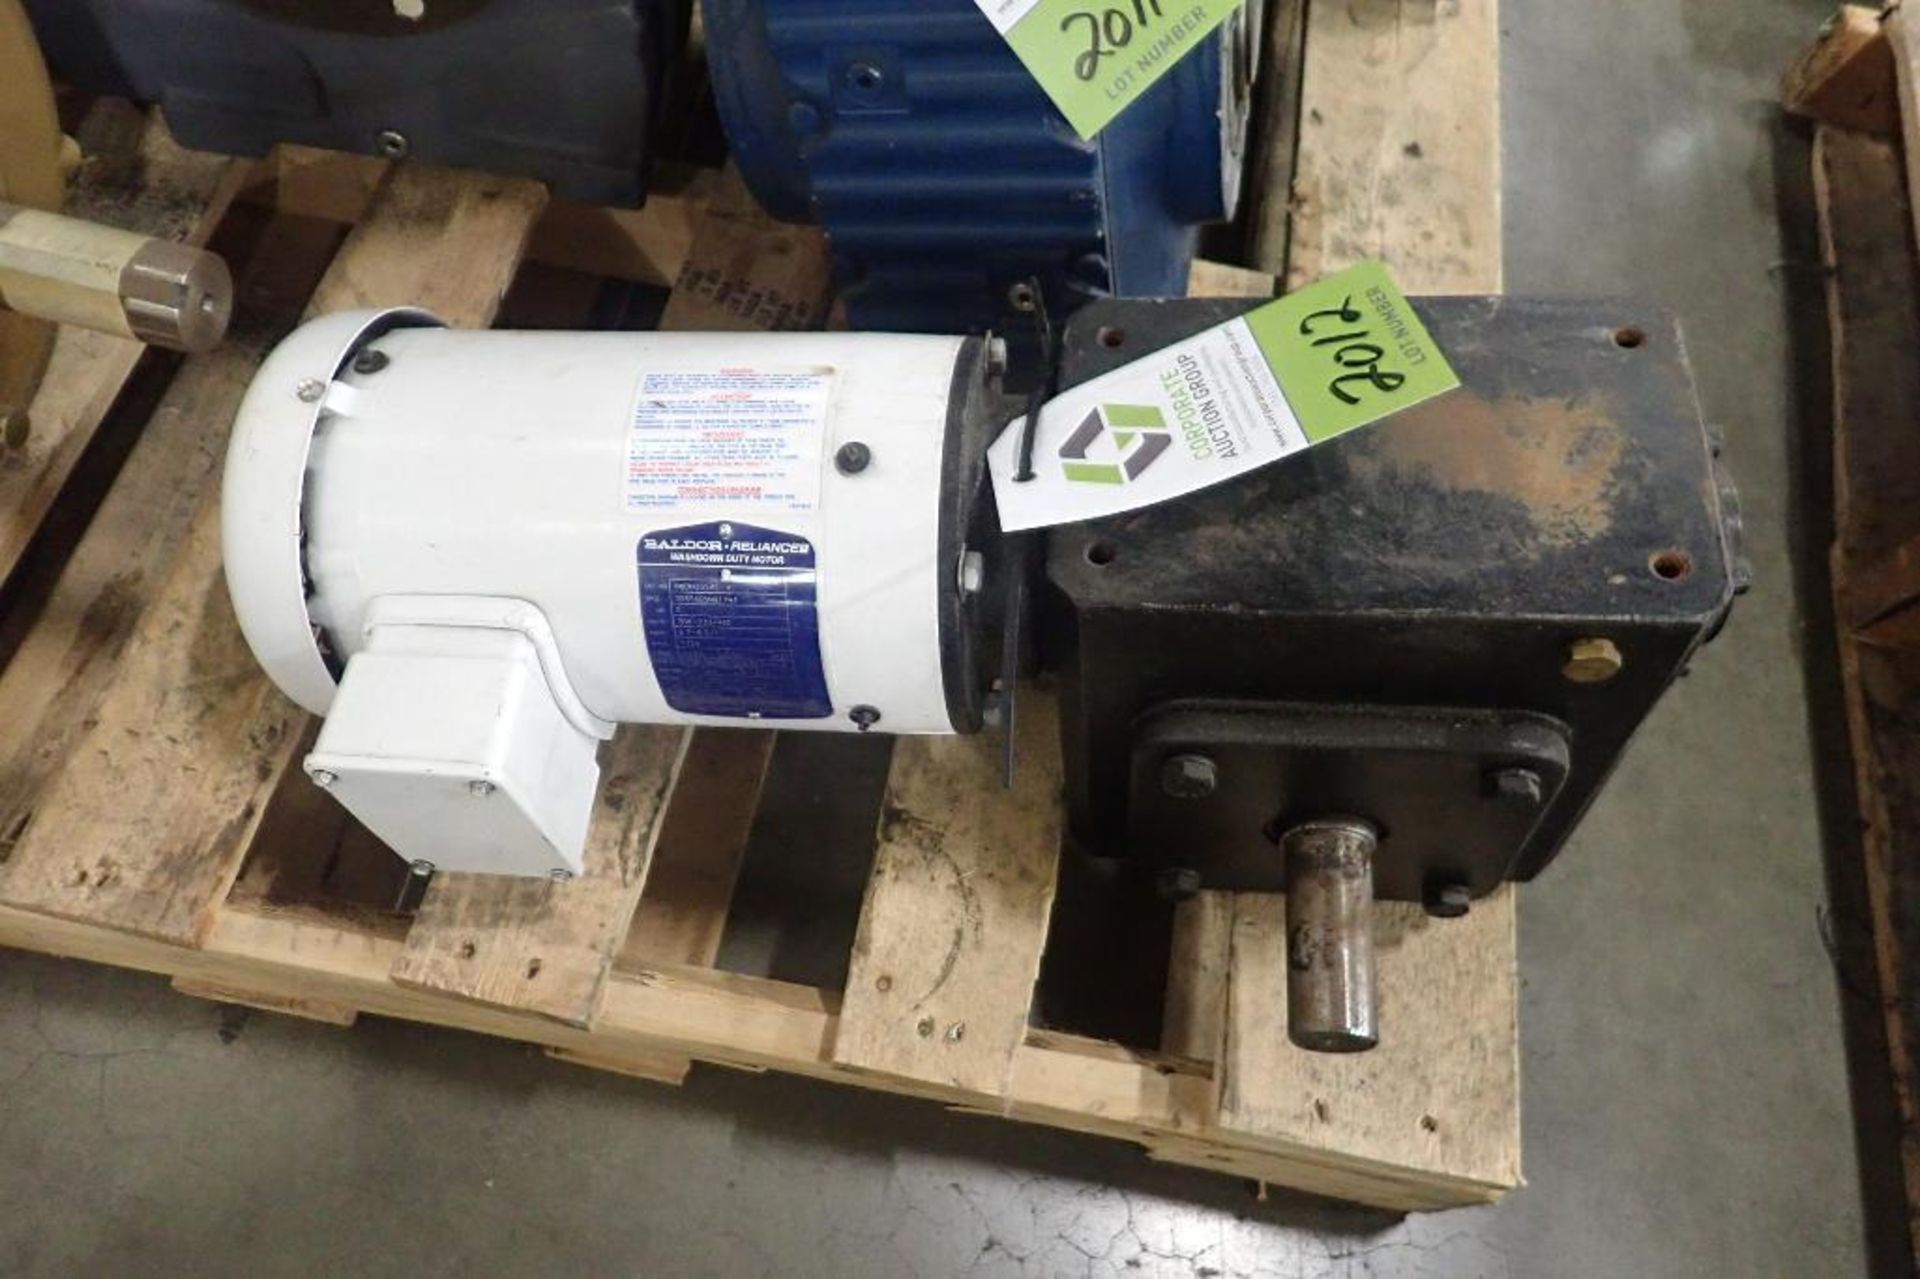 Baldor 2 hp electric motor and gearbox. (See photos for additional specs). **Rigging Fee: $25** (Loc